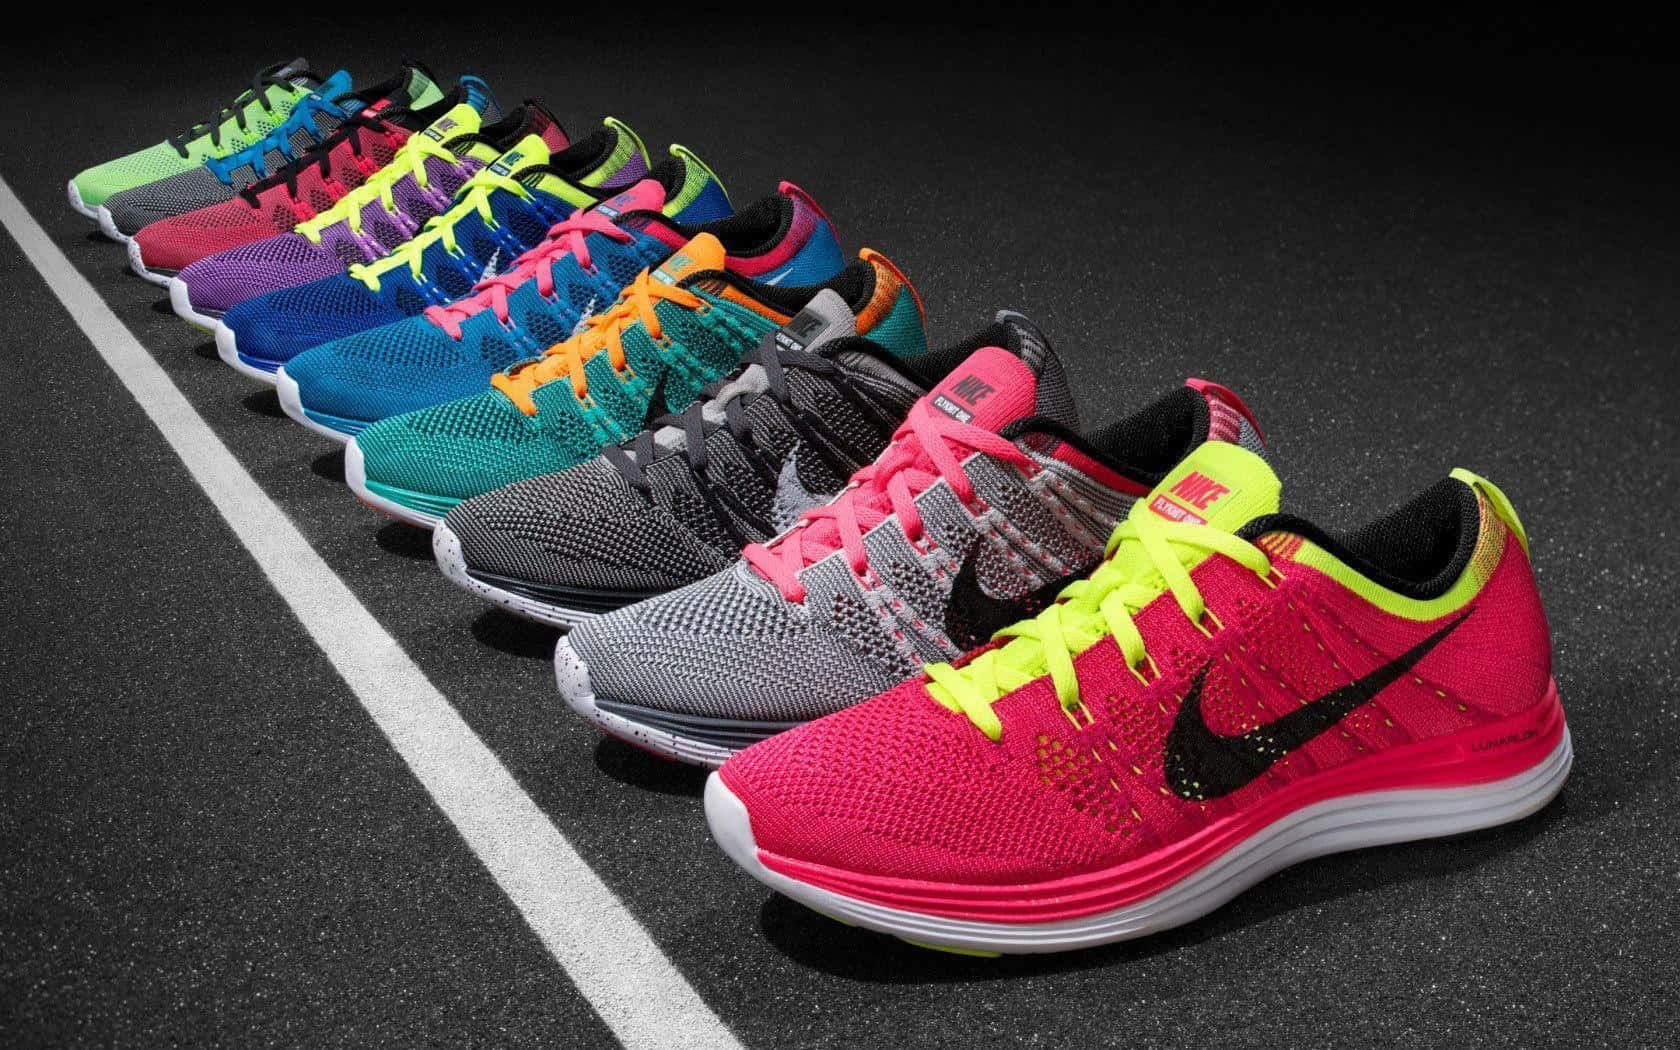 Nike Lunar Flyknit Running Shoes In Different Colors